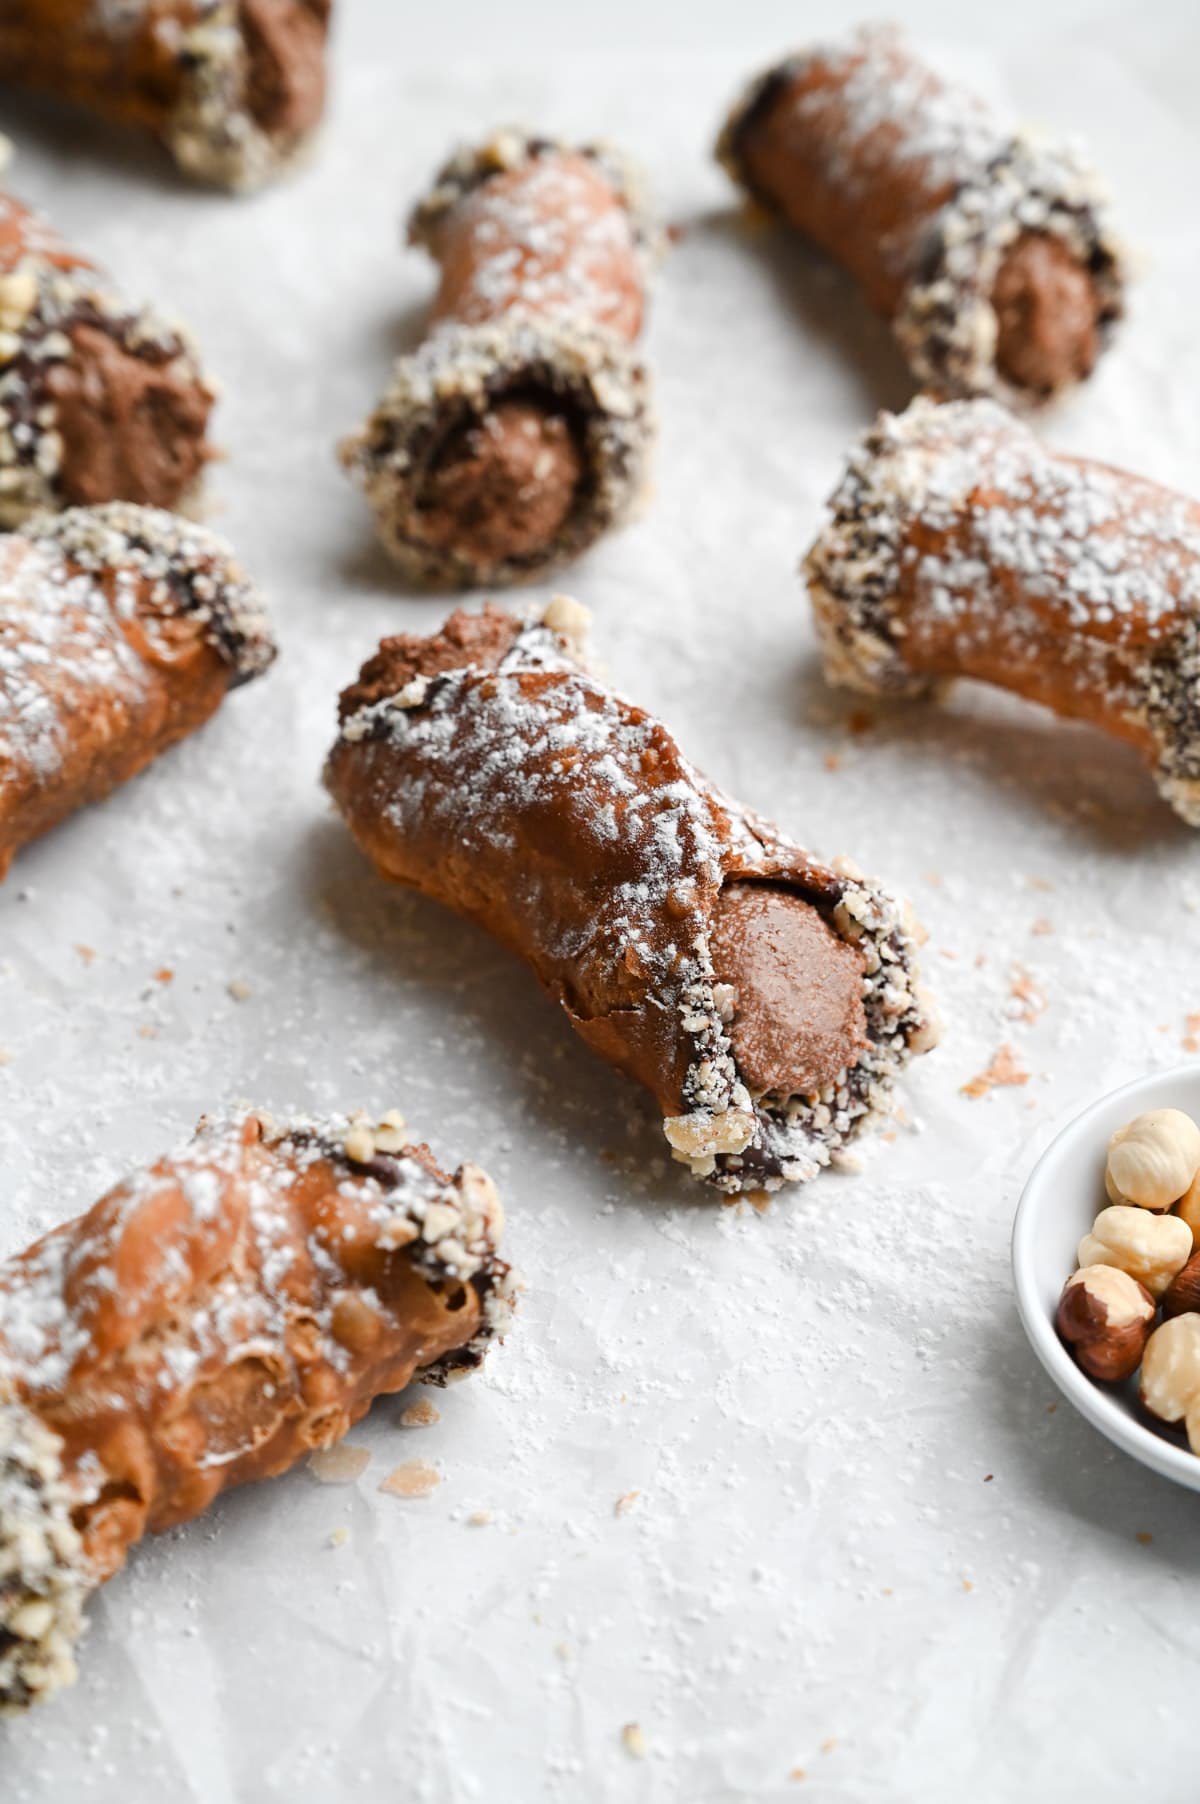 A group of Nutella cannoli dipped in chocolate and hazelnuts on parchment paper.